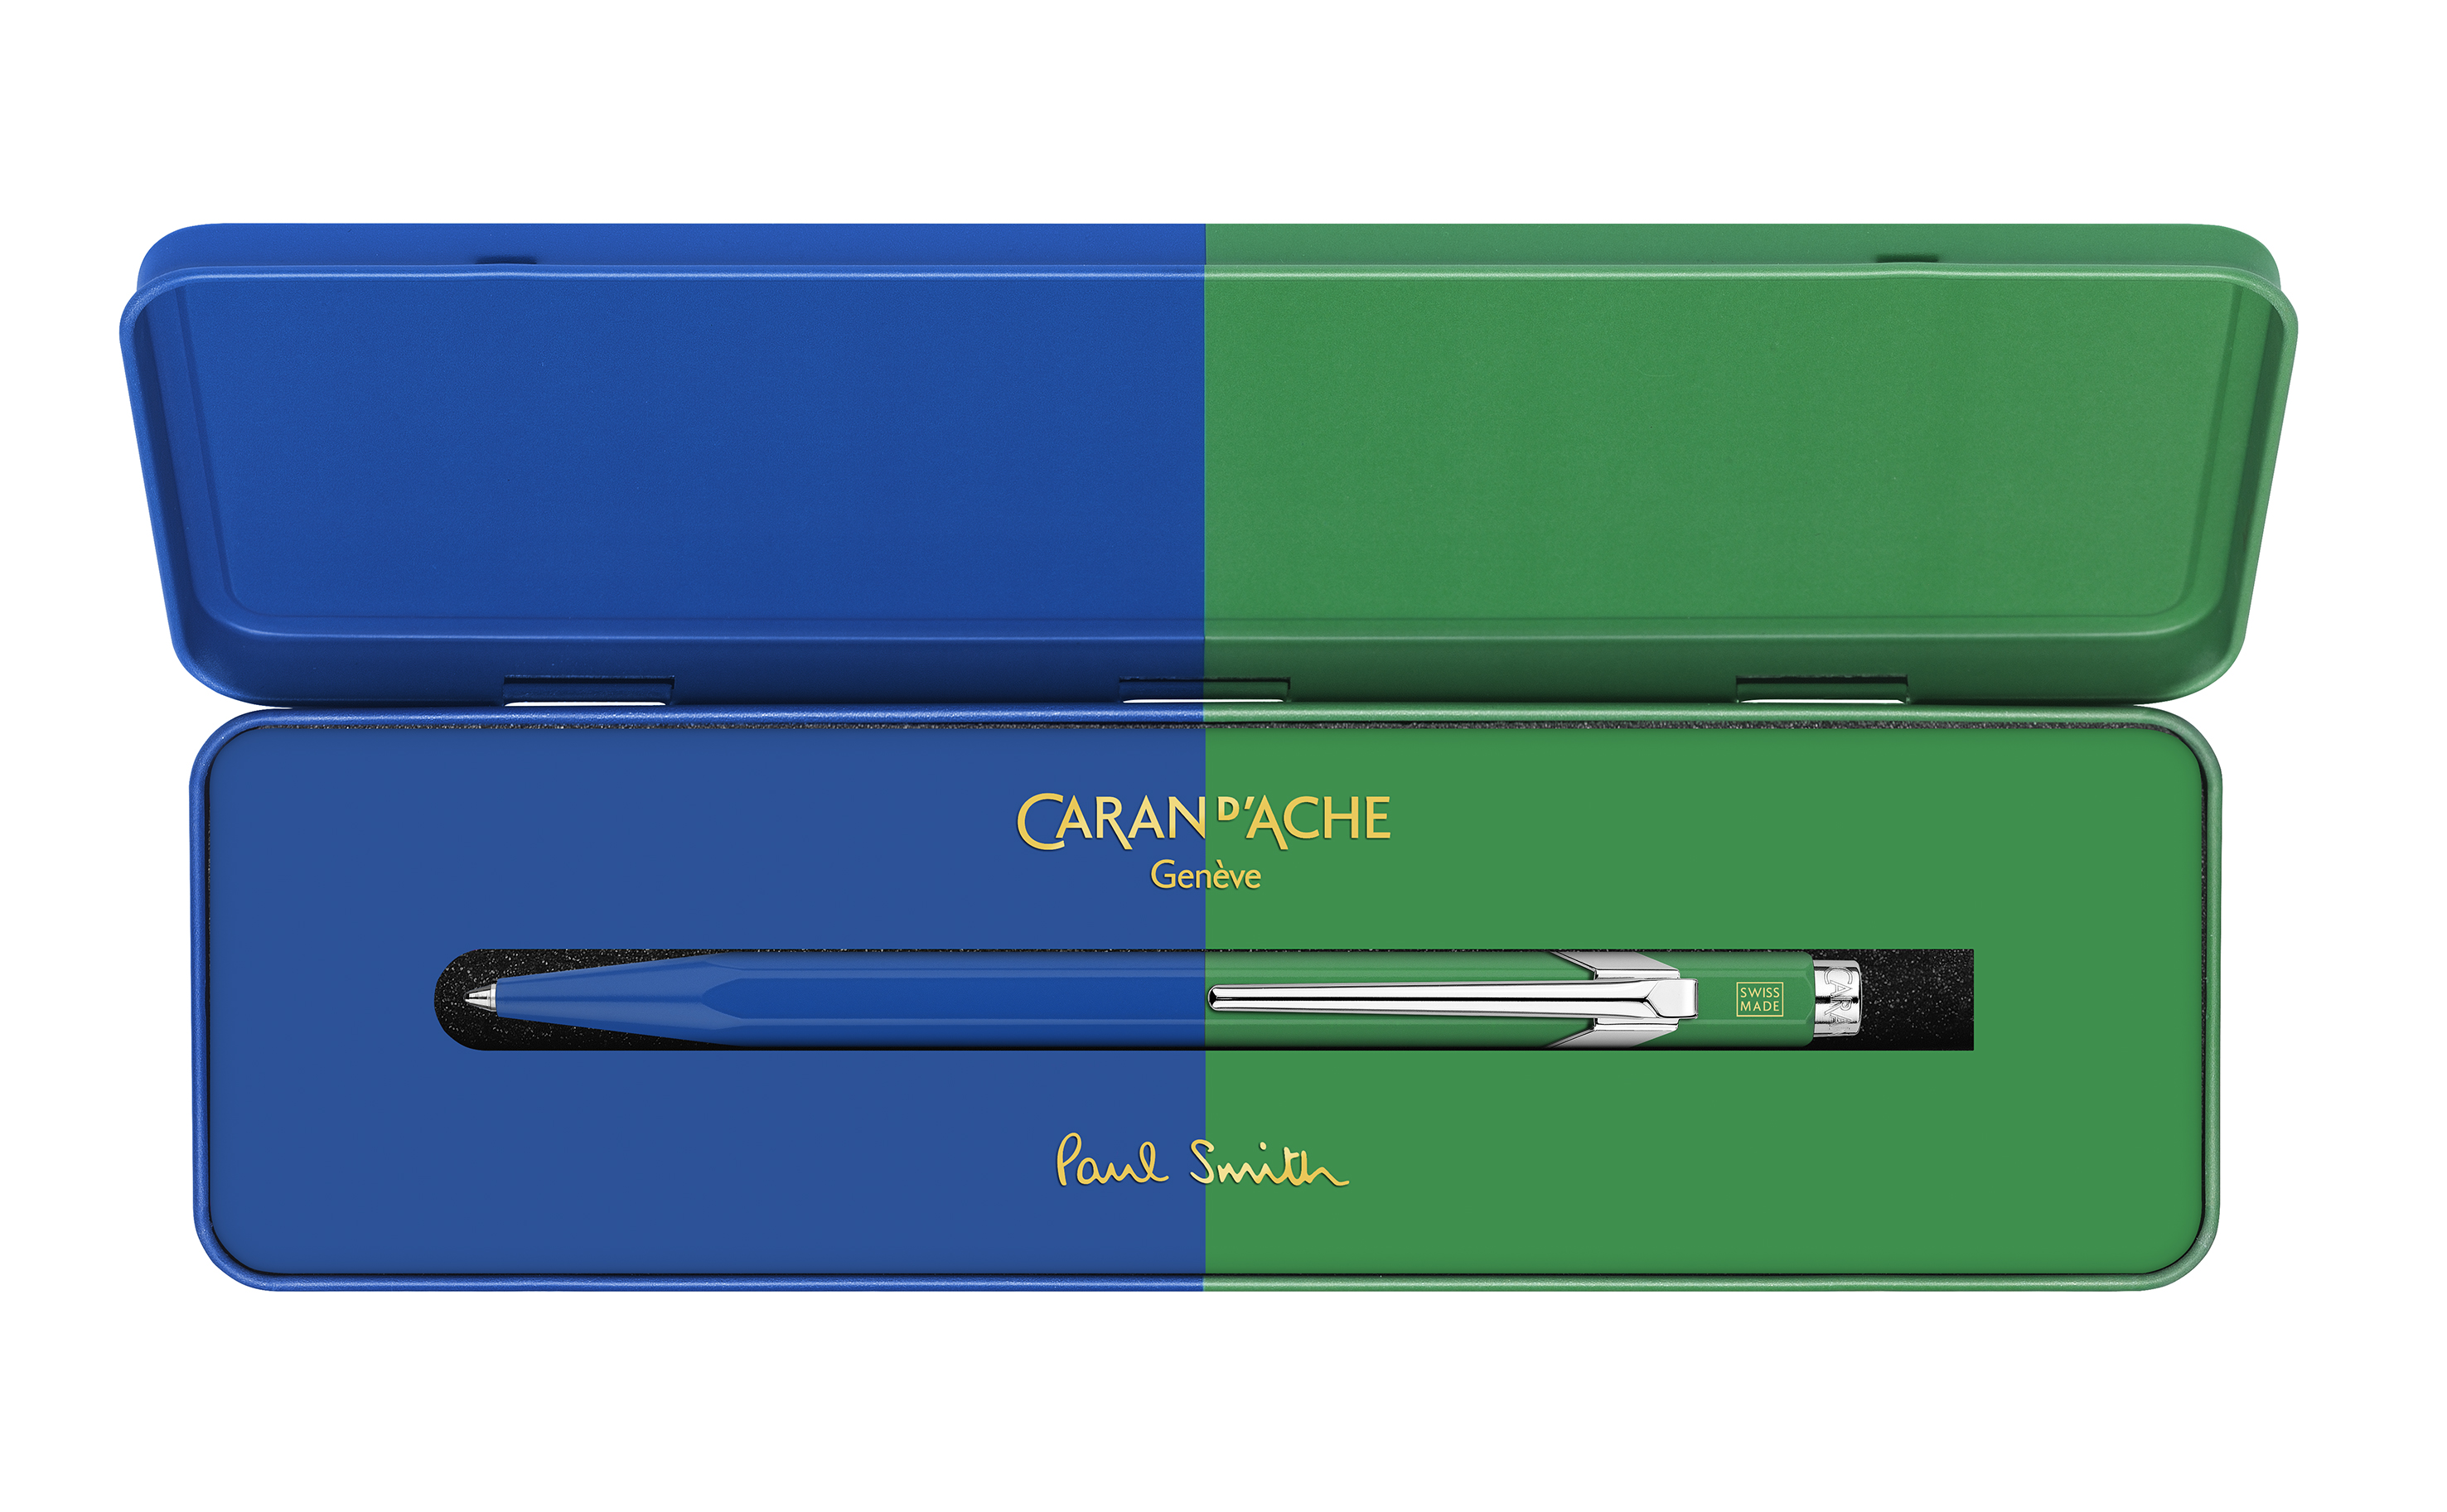 ballpoint pen 849 collaboration paul smith fourth edition colours cobalt and emerald in its metal case